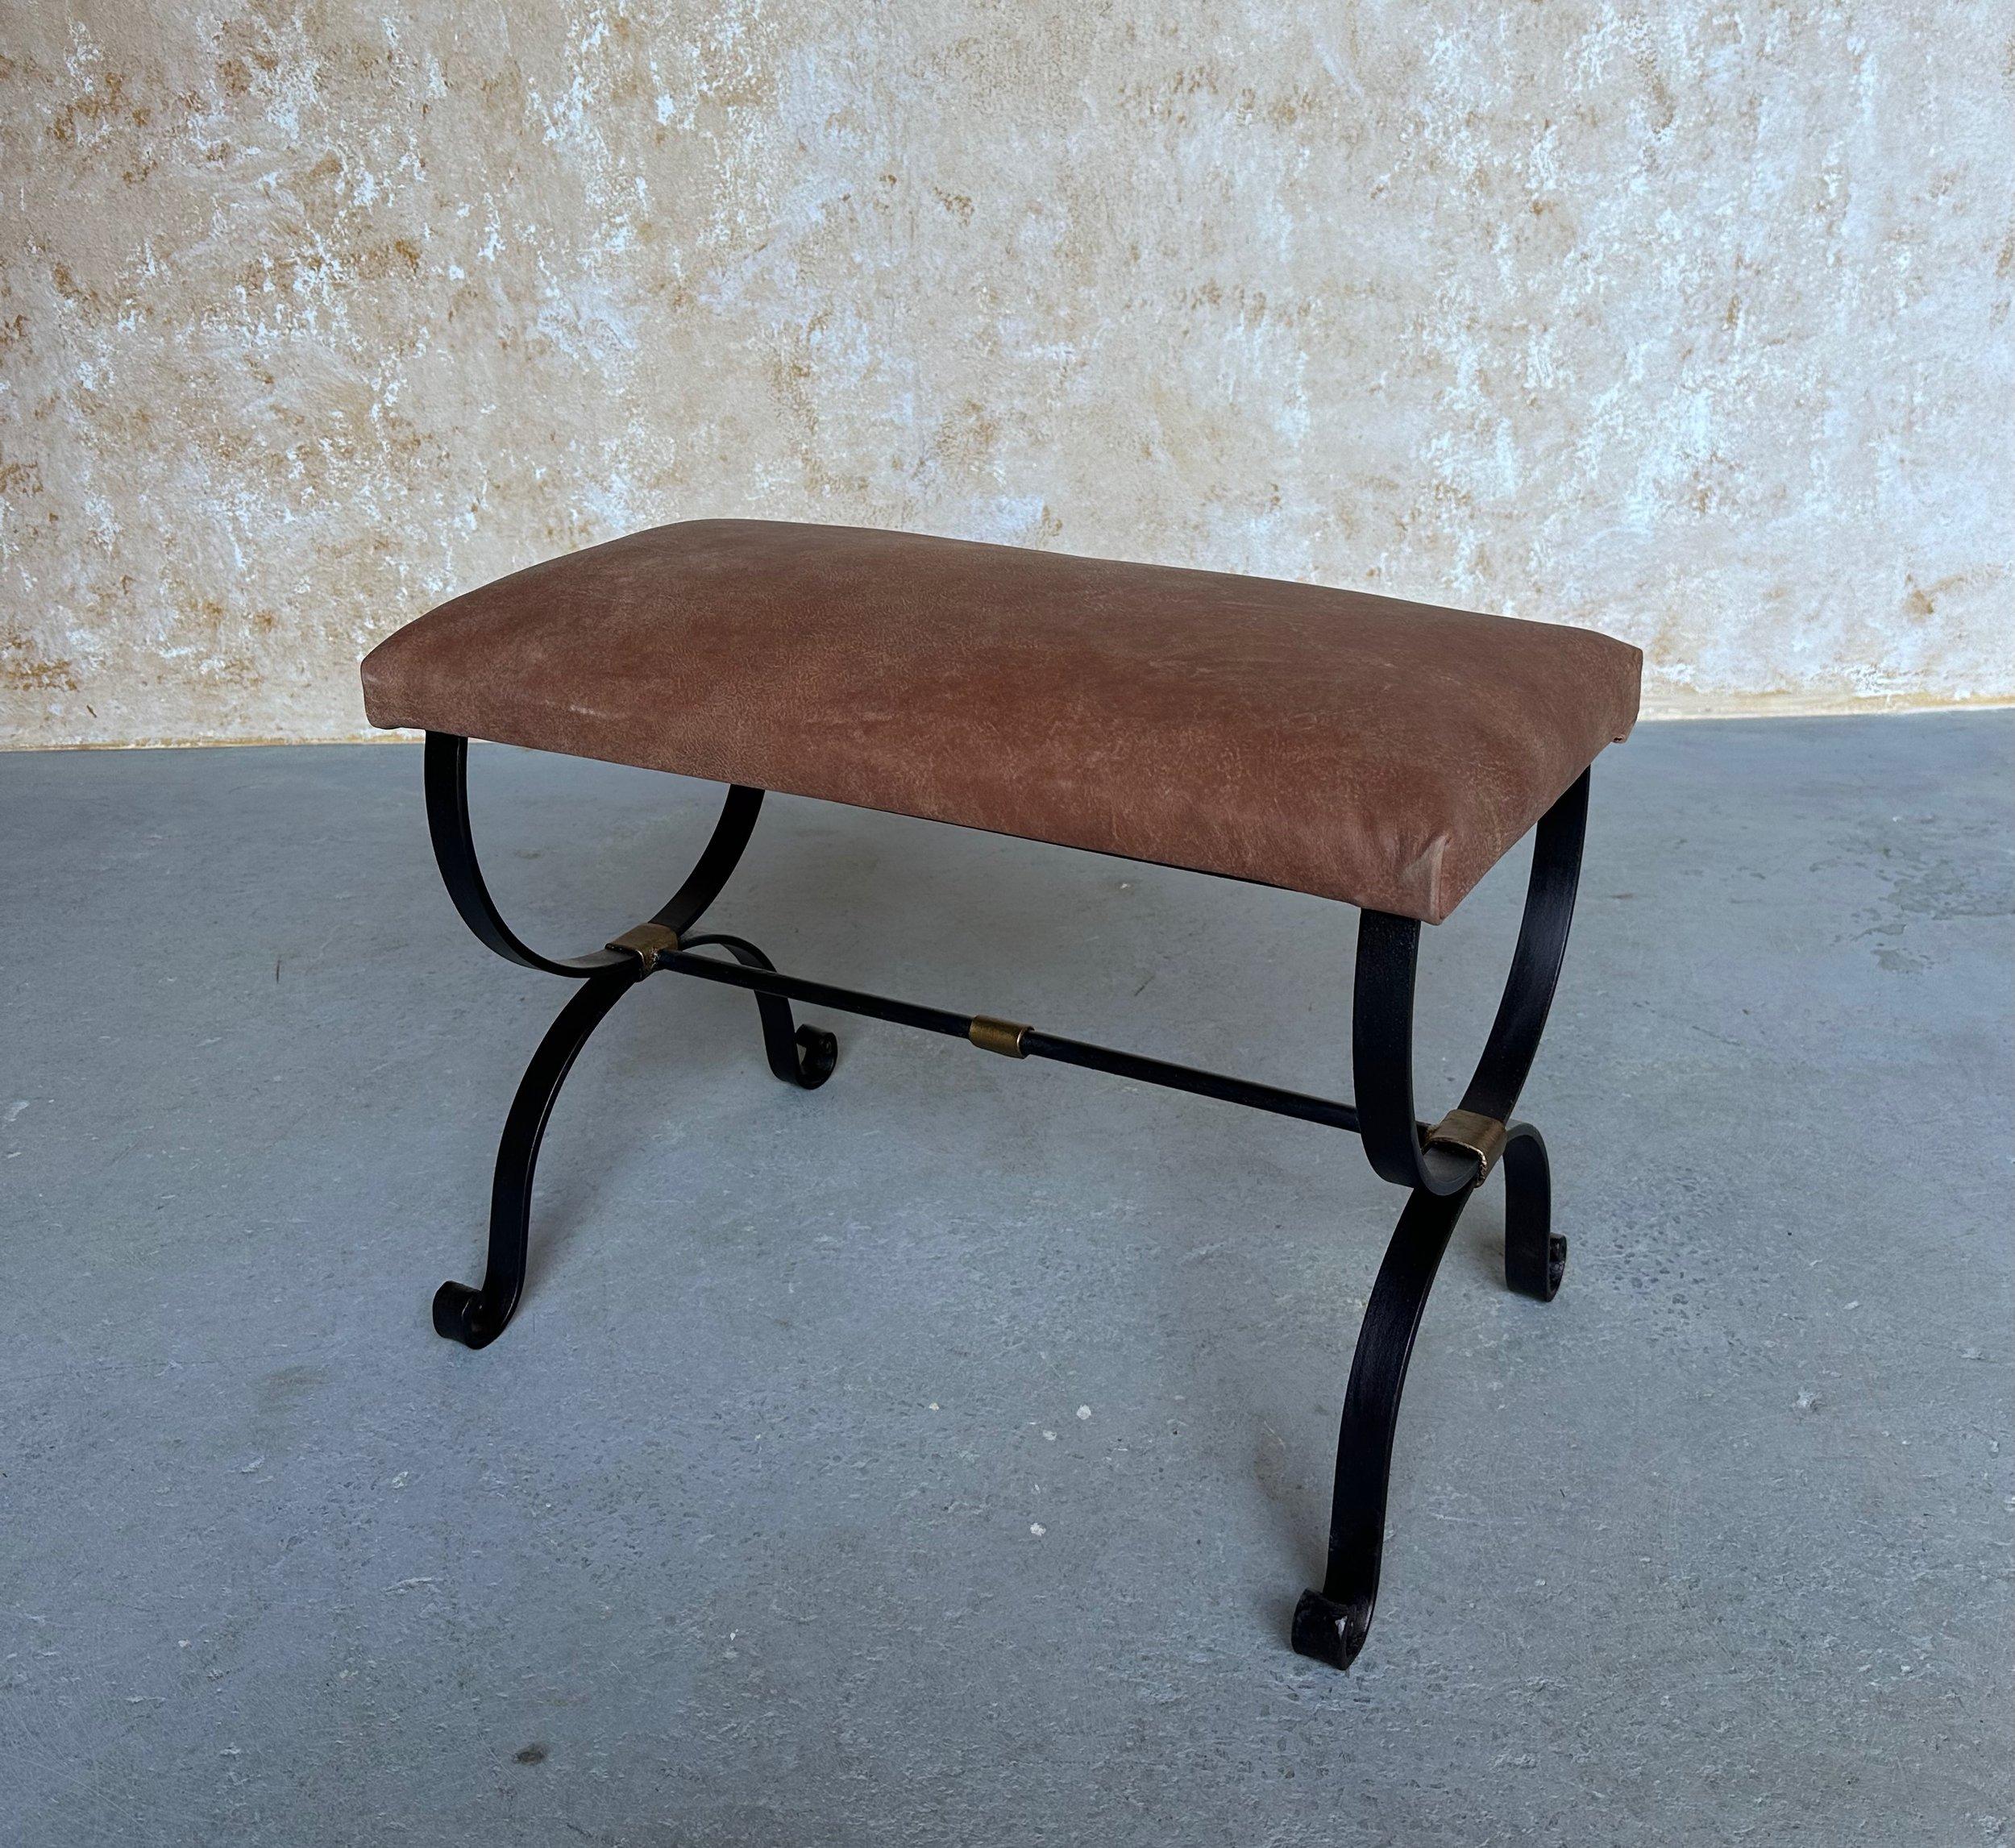 Spanish Iron Bench in Brown Leather In Good Condition For Sale In Buchanan, NY